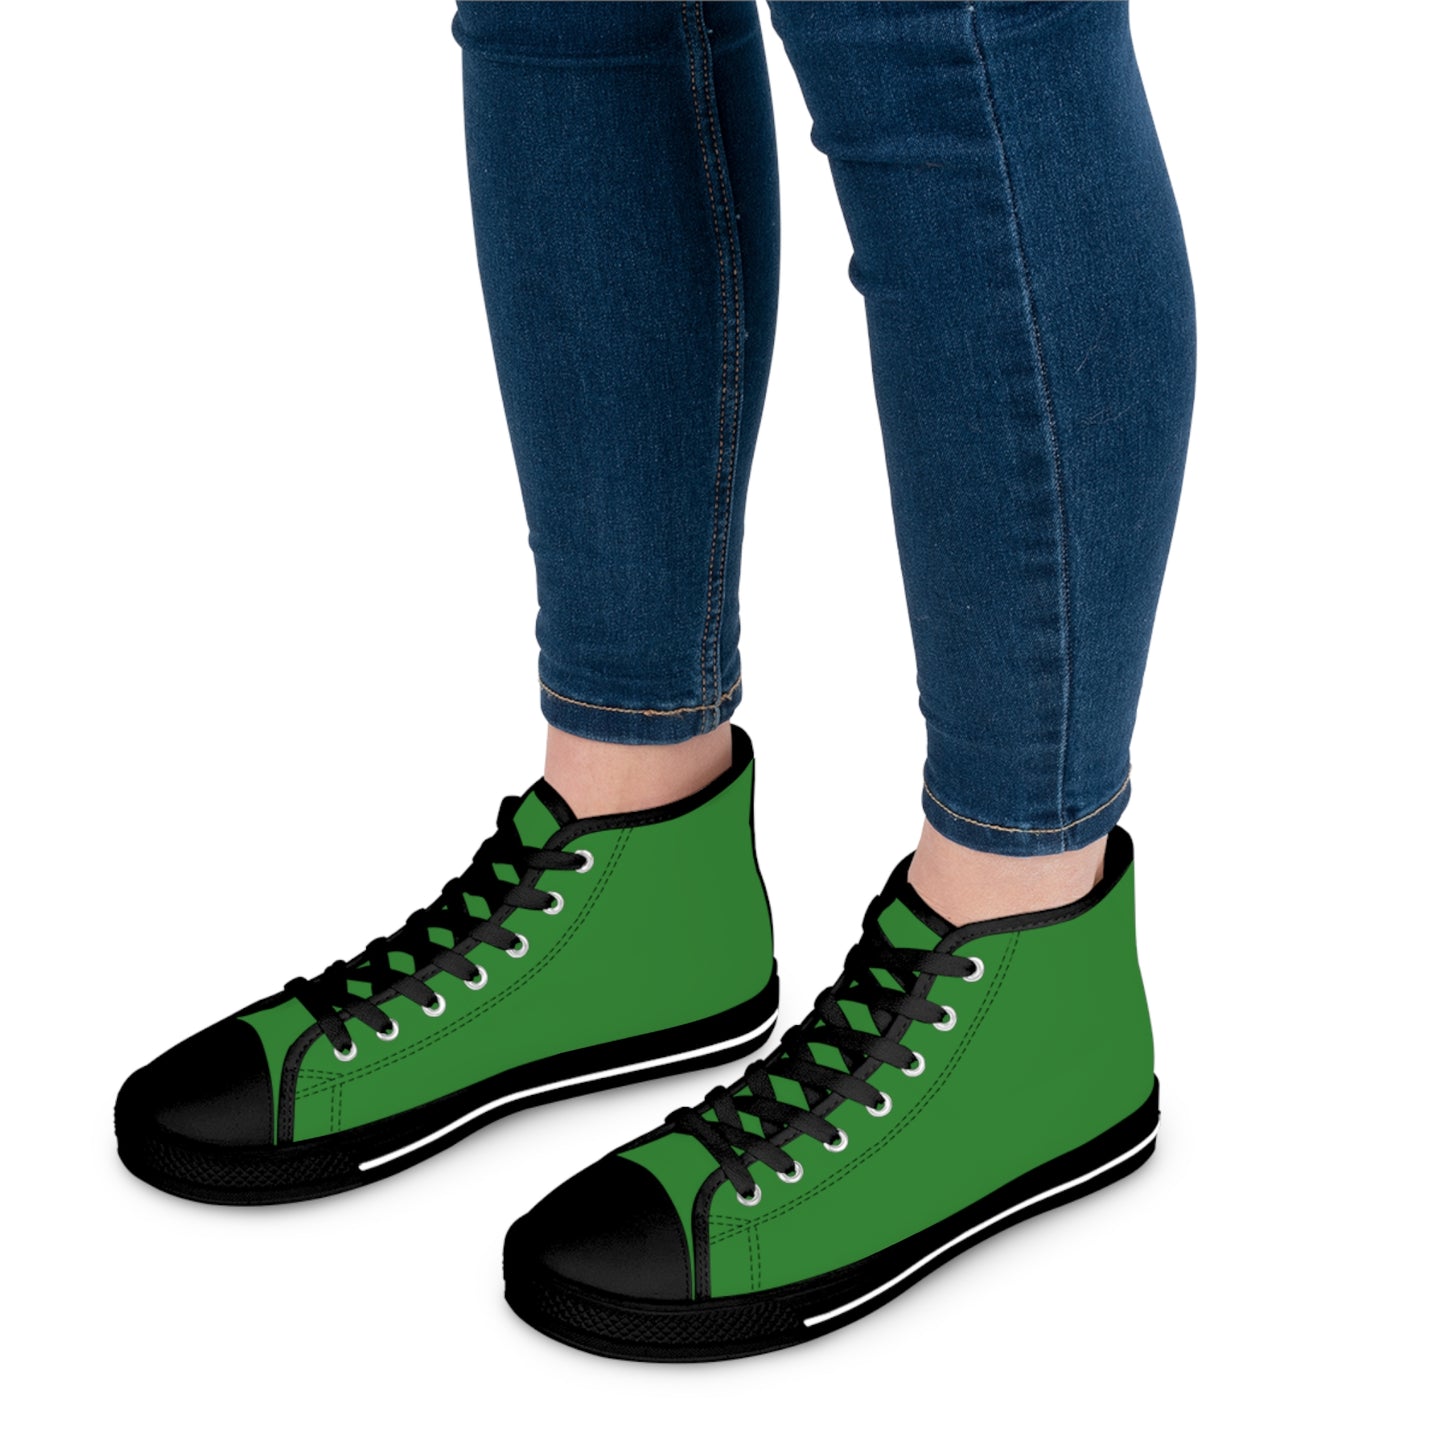 Women's High Top Sneakers - Green US 12 White sole